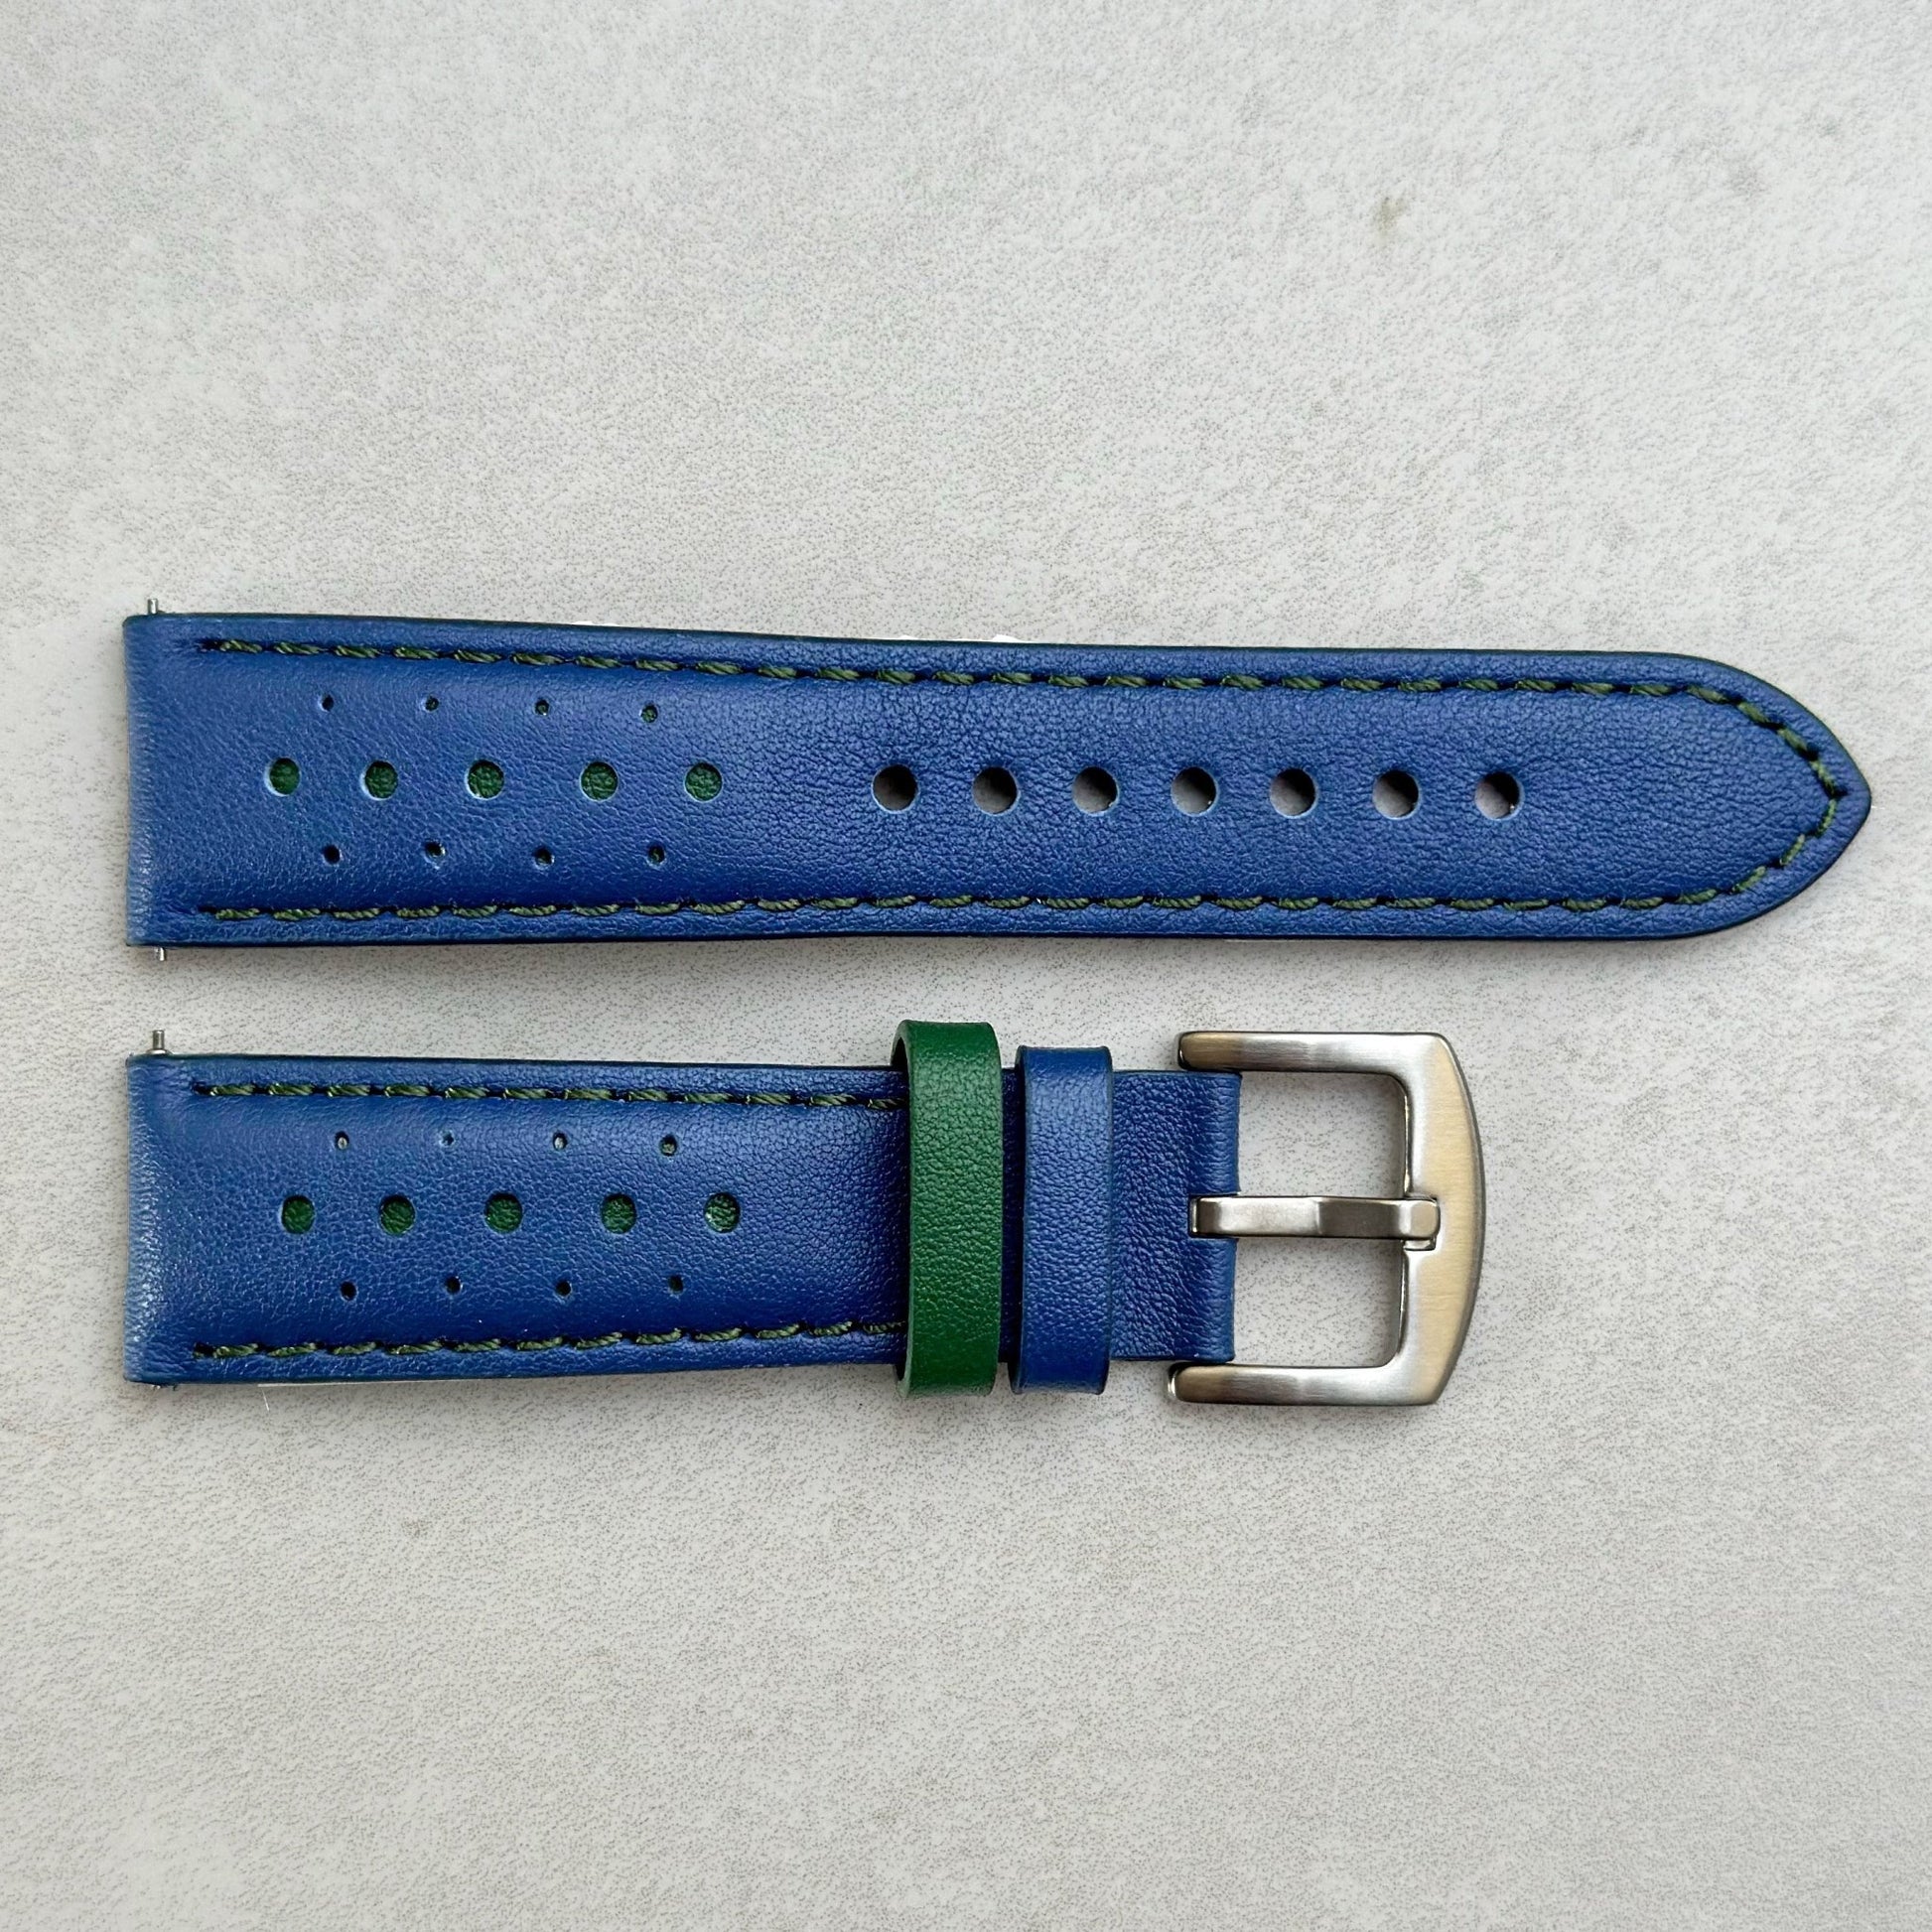 Birds eye view picture of the Le Mans cobalt blue and green full grain leather racing watch strap.